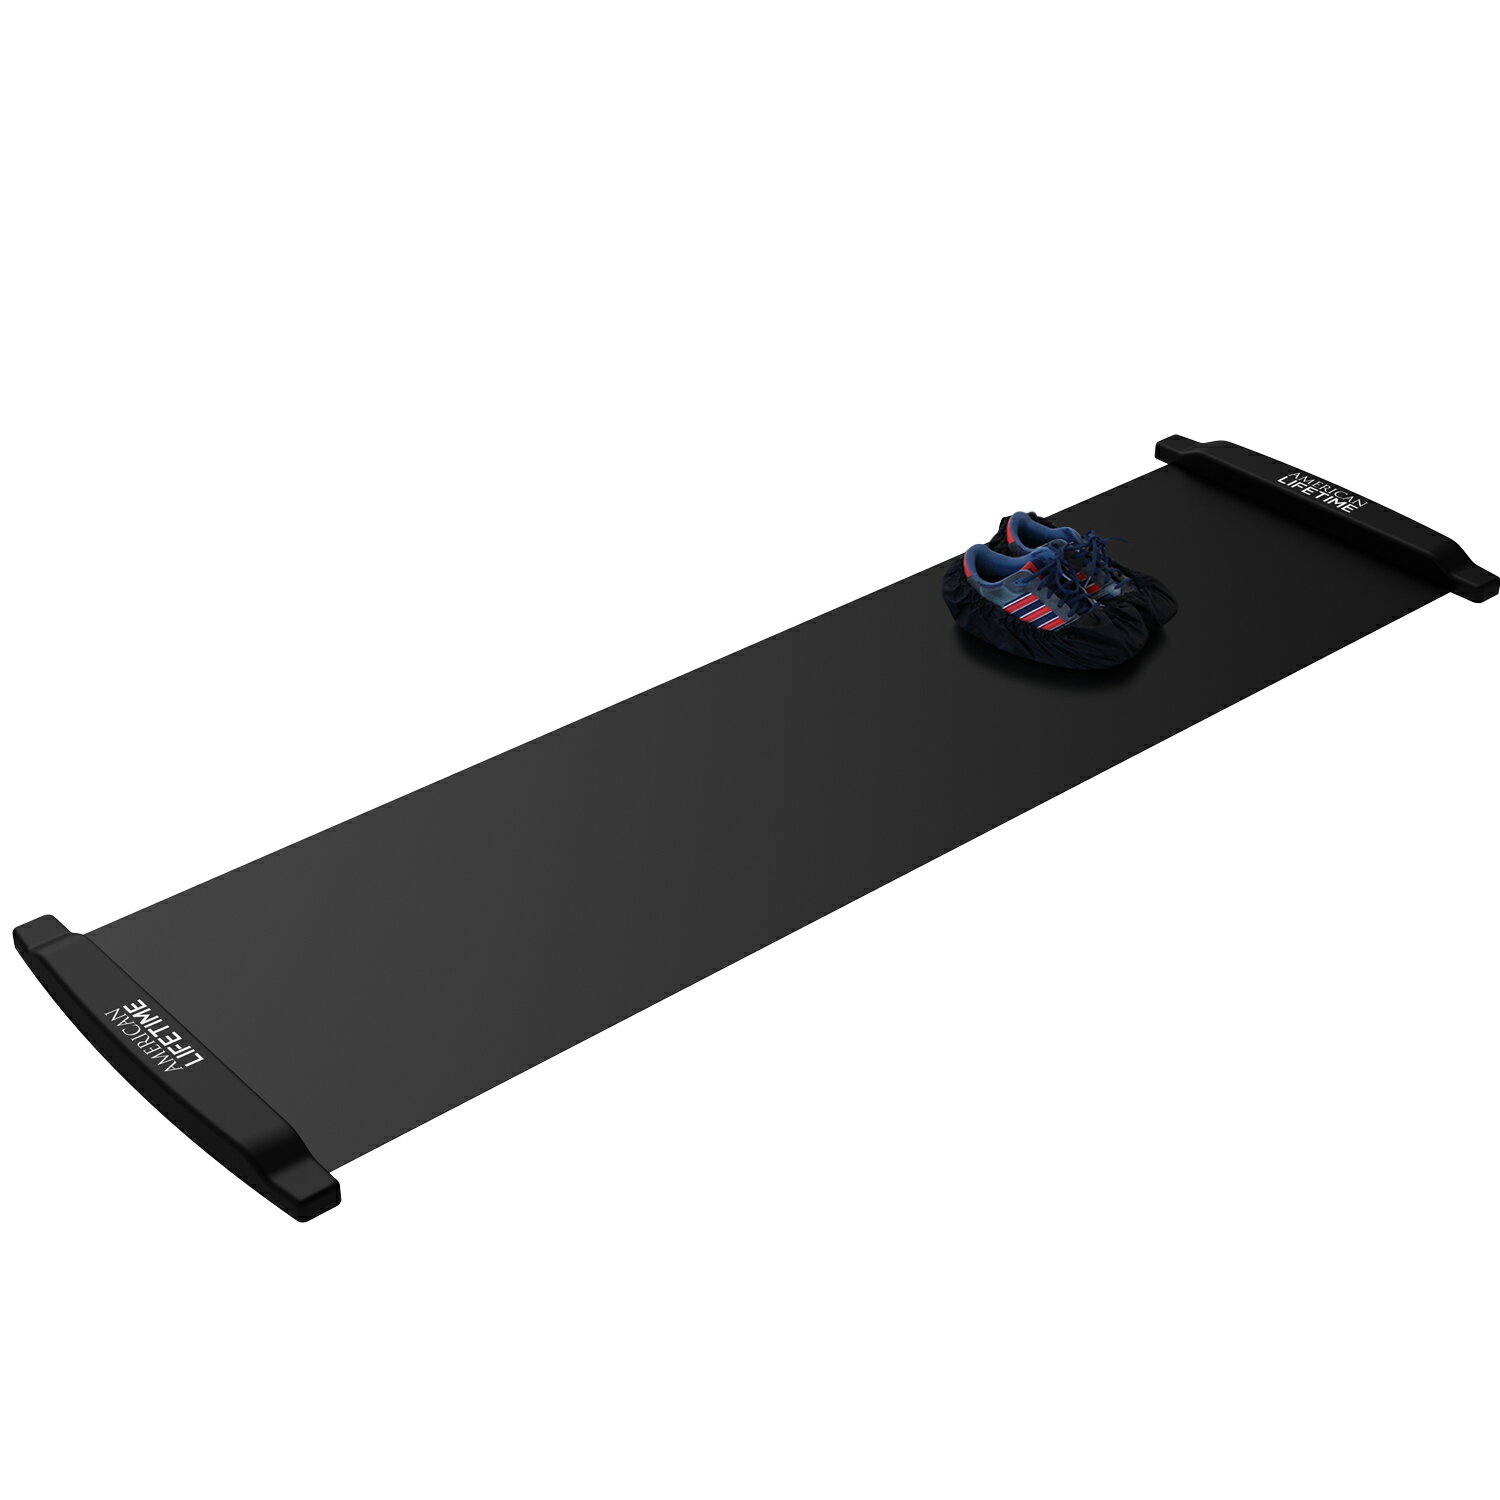 Workout Board for Fitness Training and Therapy with Shoe Booties and Carrying Bag Included 6//7.5 Feet Black//White//Blue American Lifetime Slide Board